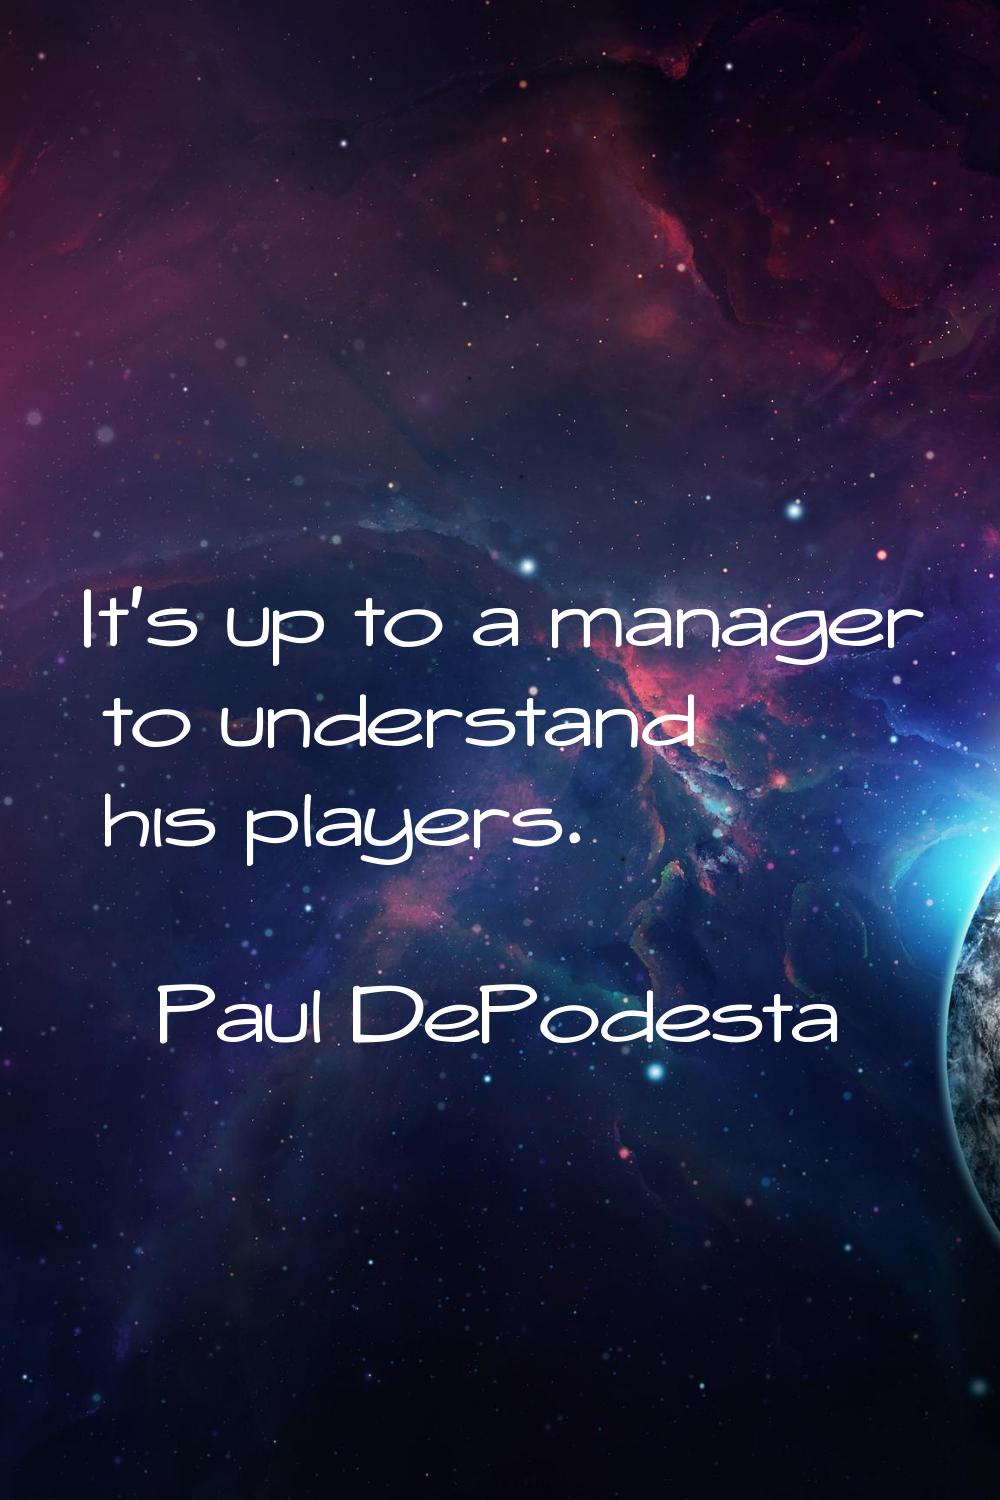 It's up to a manager to understand his players.